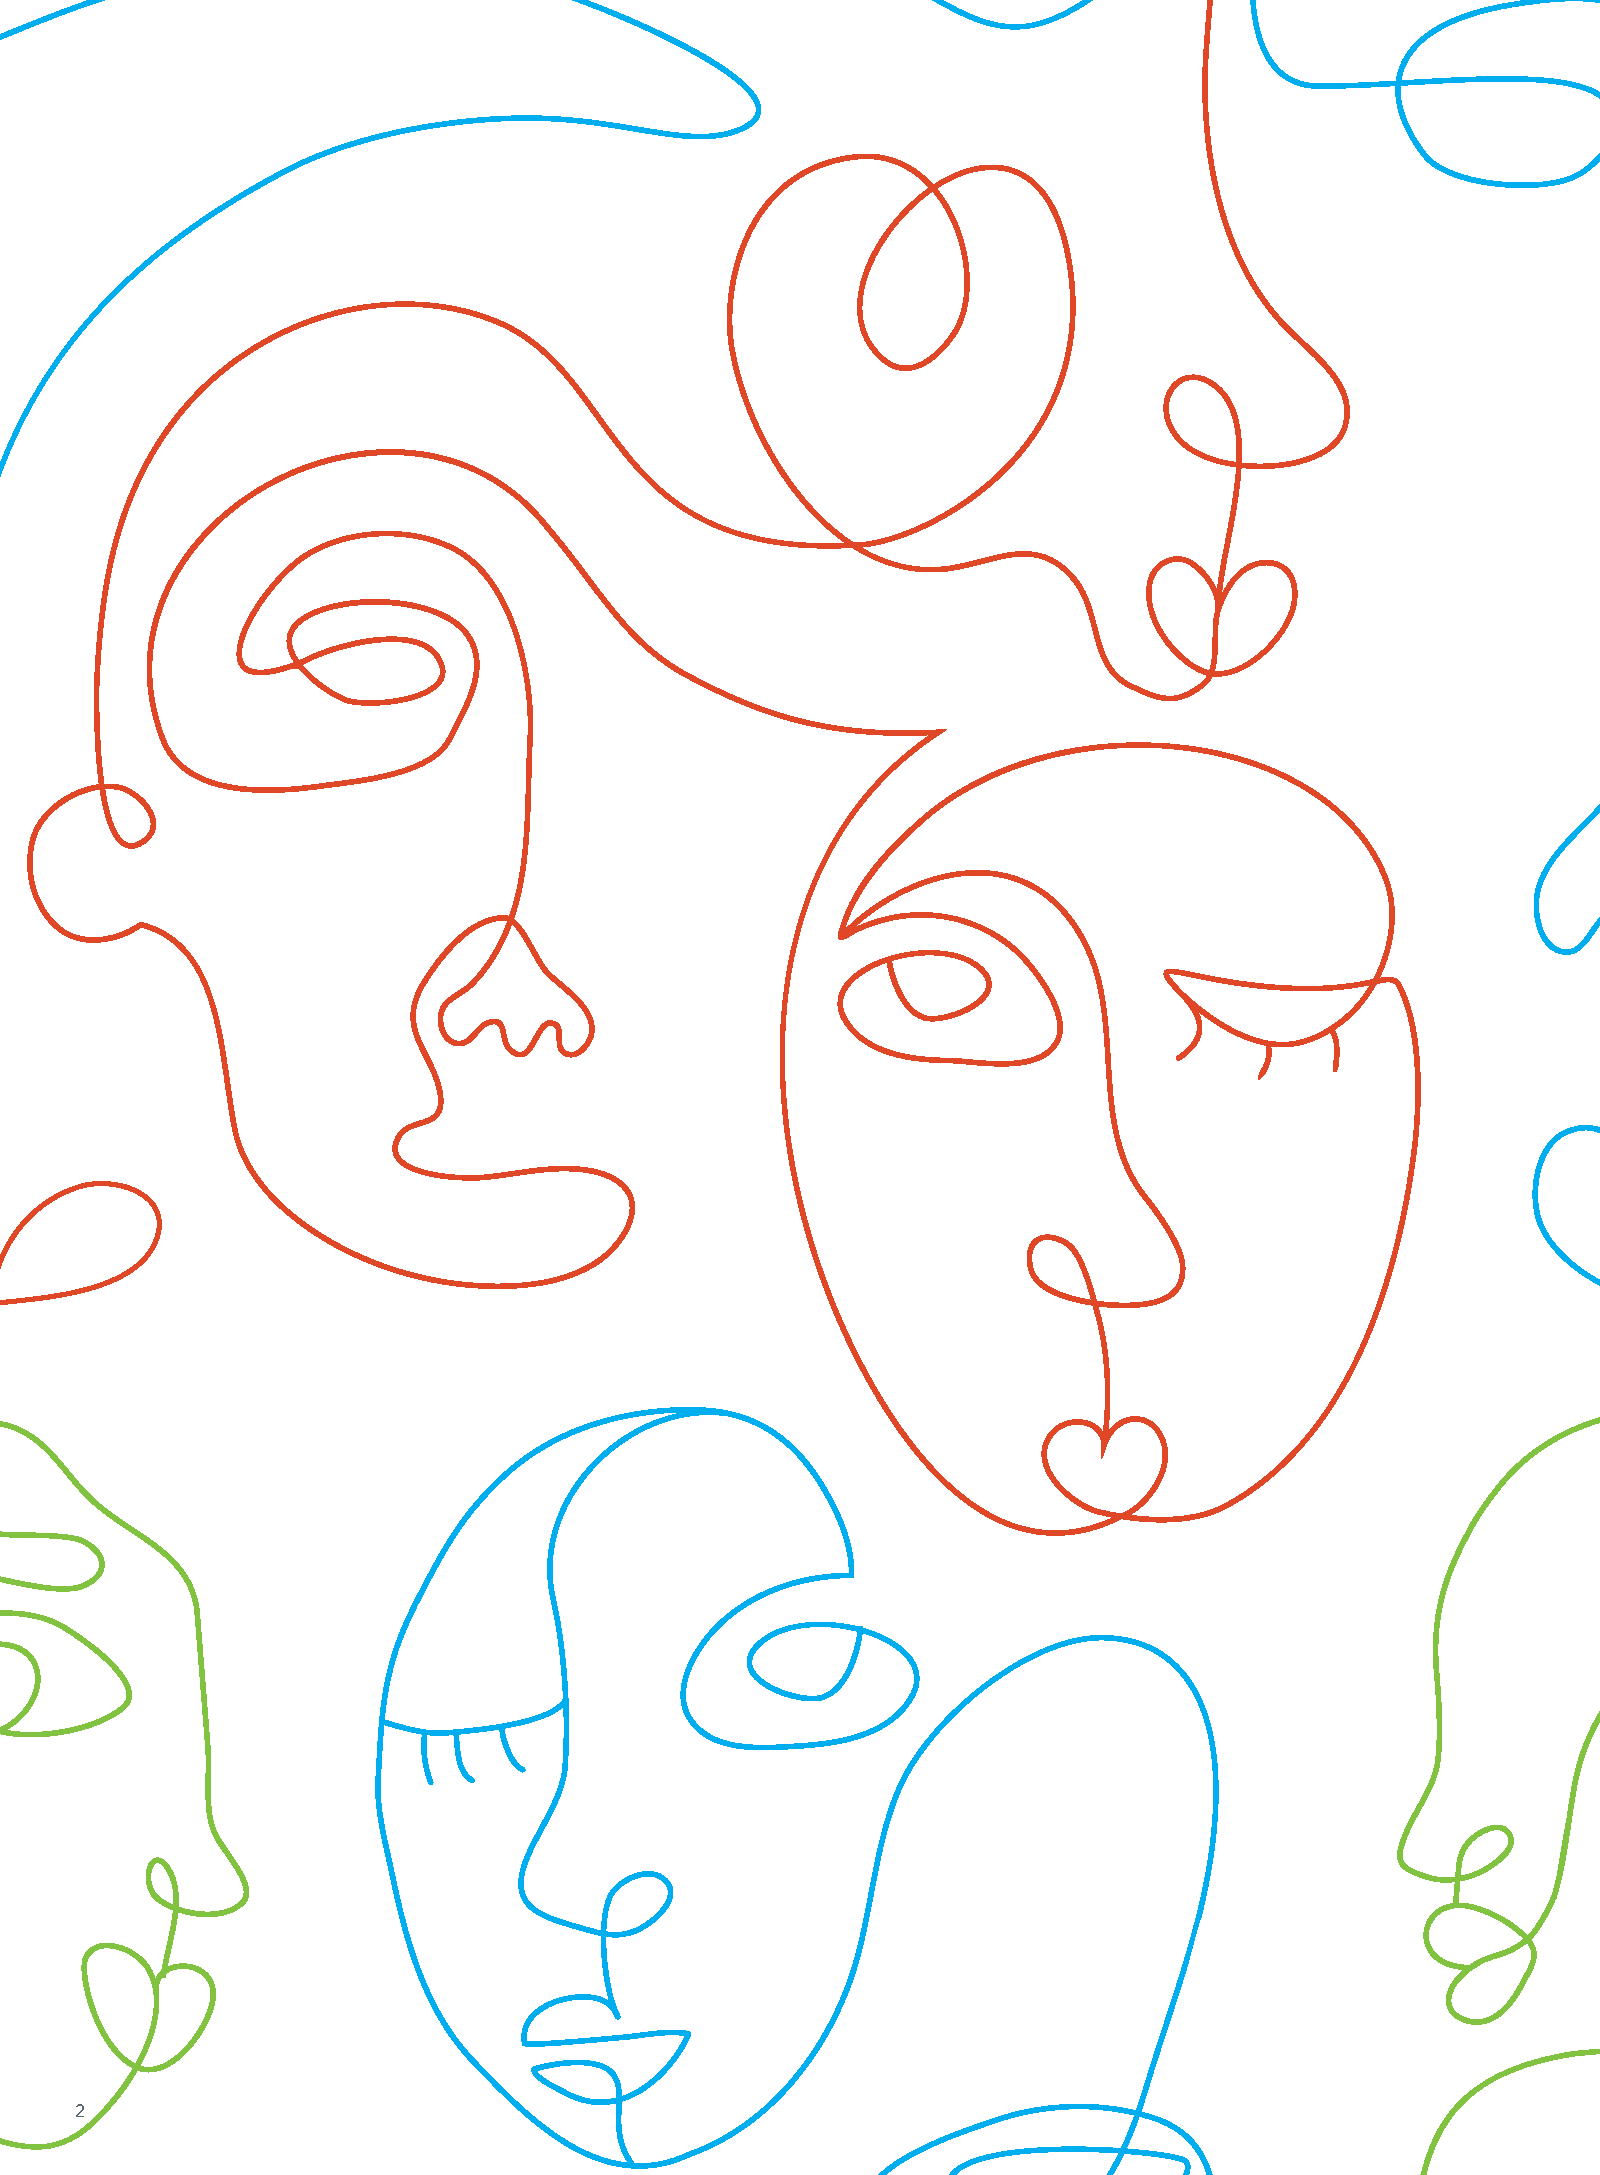 Abstract, continuous line drawings of faces.